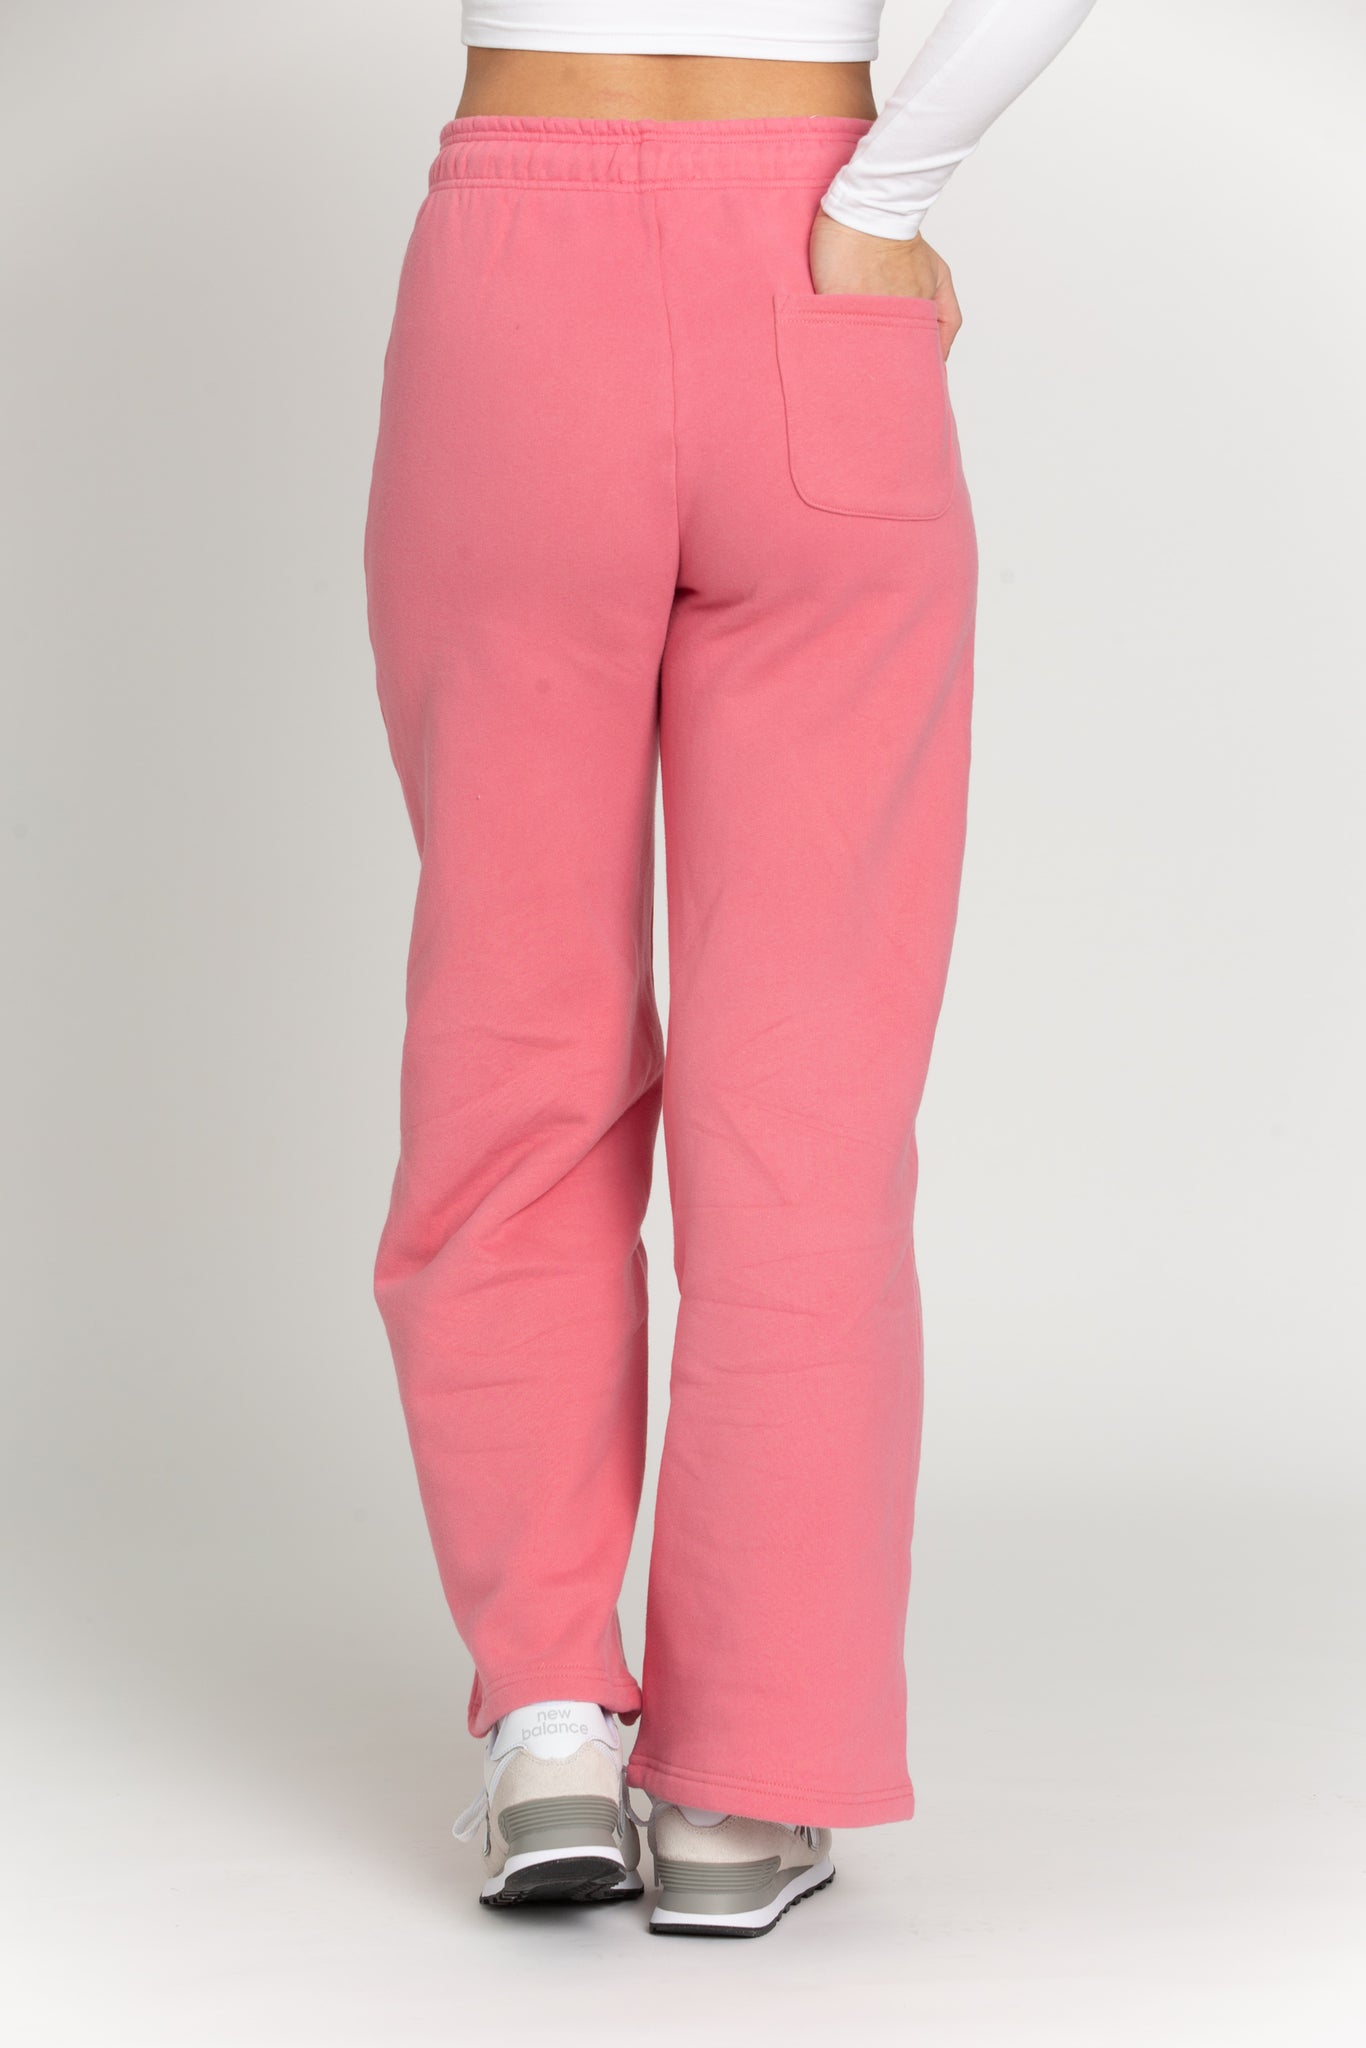 Our Rouge Wide Leg Sweatpants are the perfect combination of style and comfort, with soft fabric and functional pockets. Complete the look with a matching sweatshirt, or pair with any Gold Hinge top. Get them today and enjoy the comfort and convenience they provide.